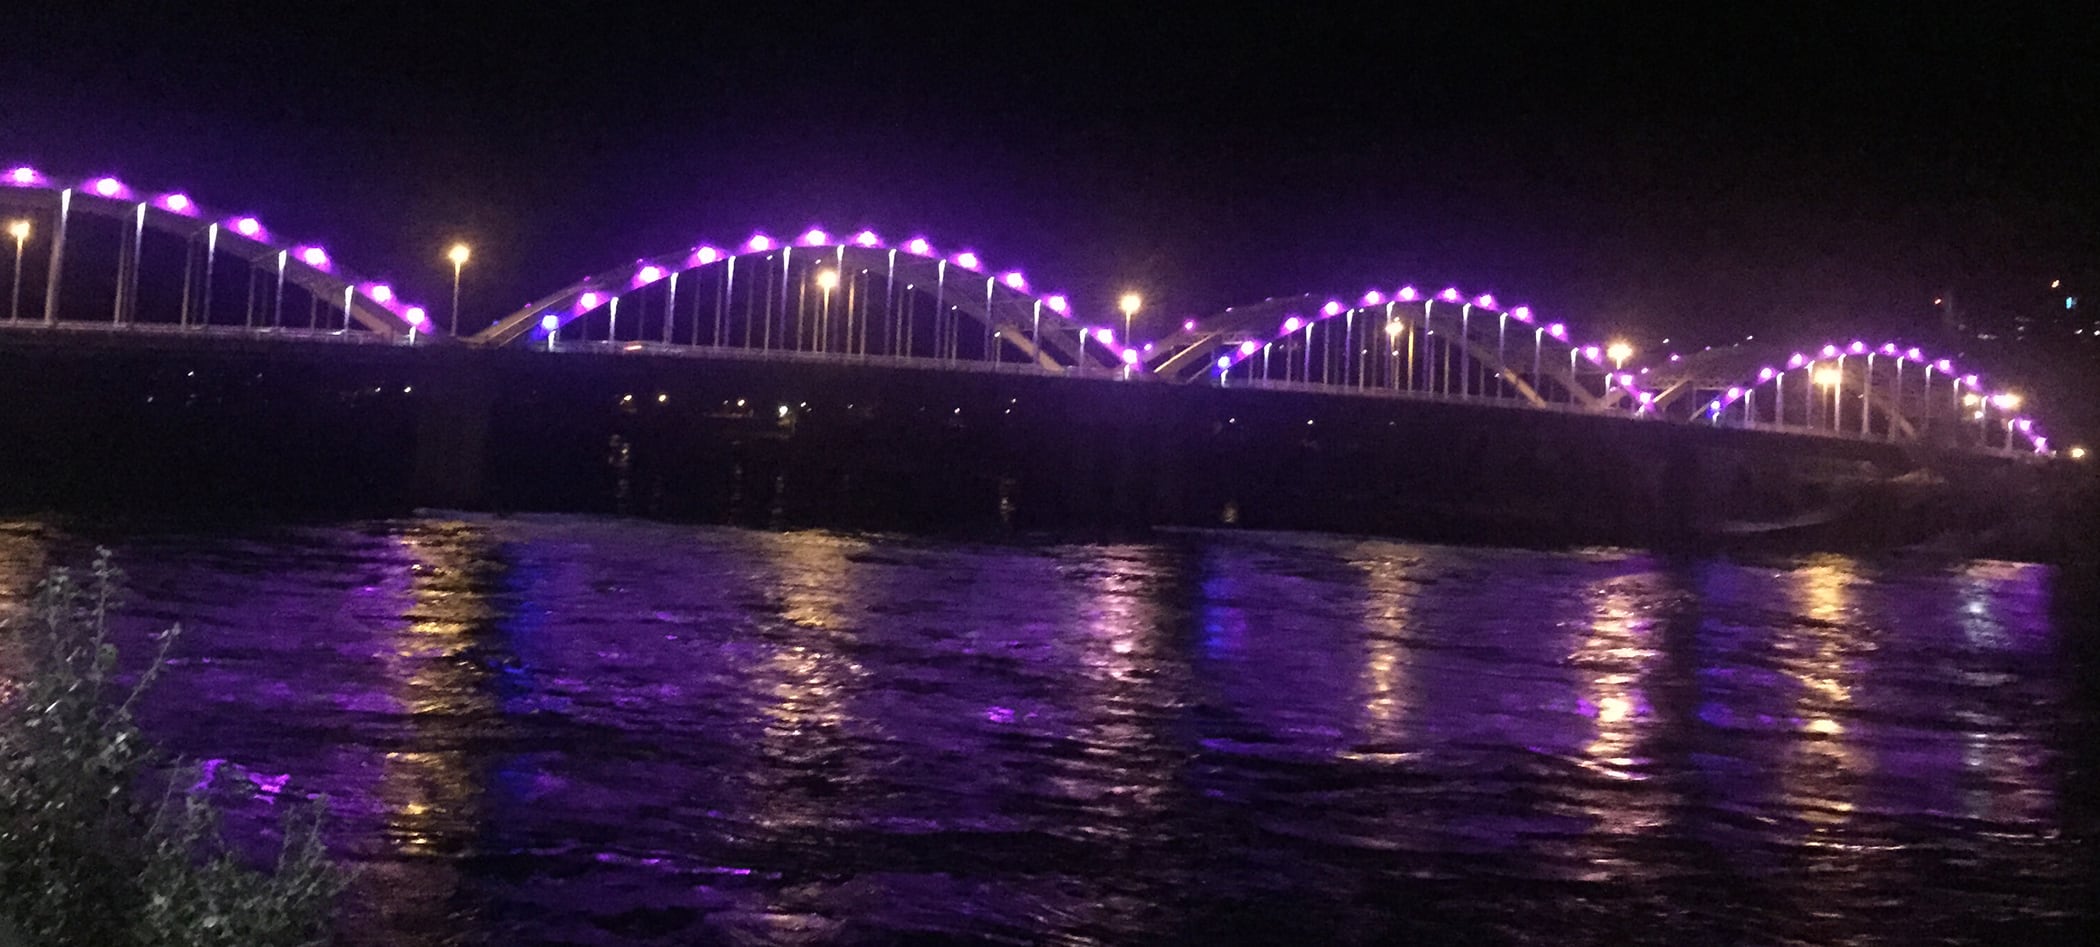 Bridge Lights Show Support for Front Line Workers